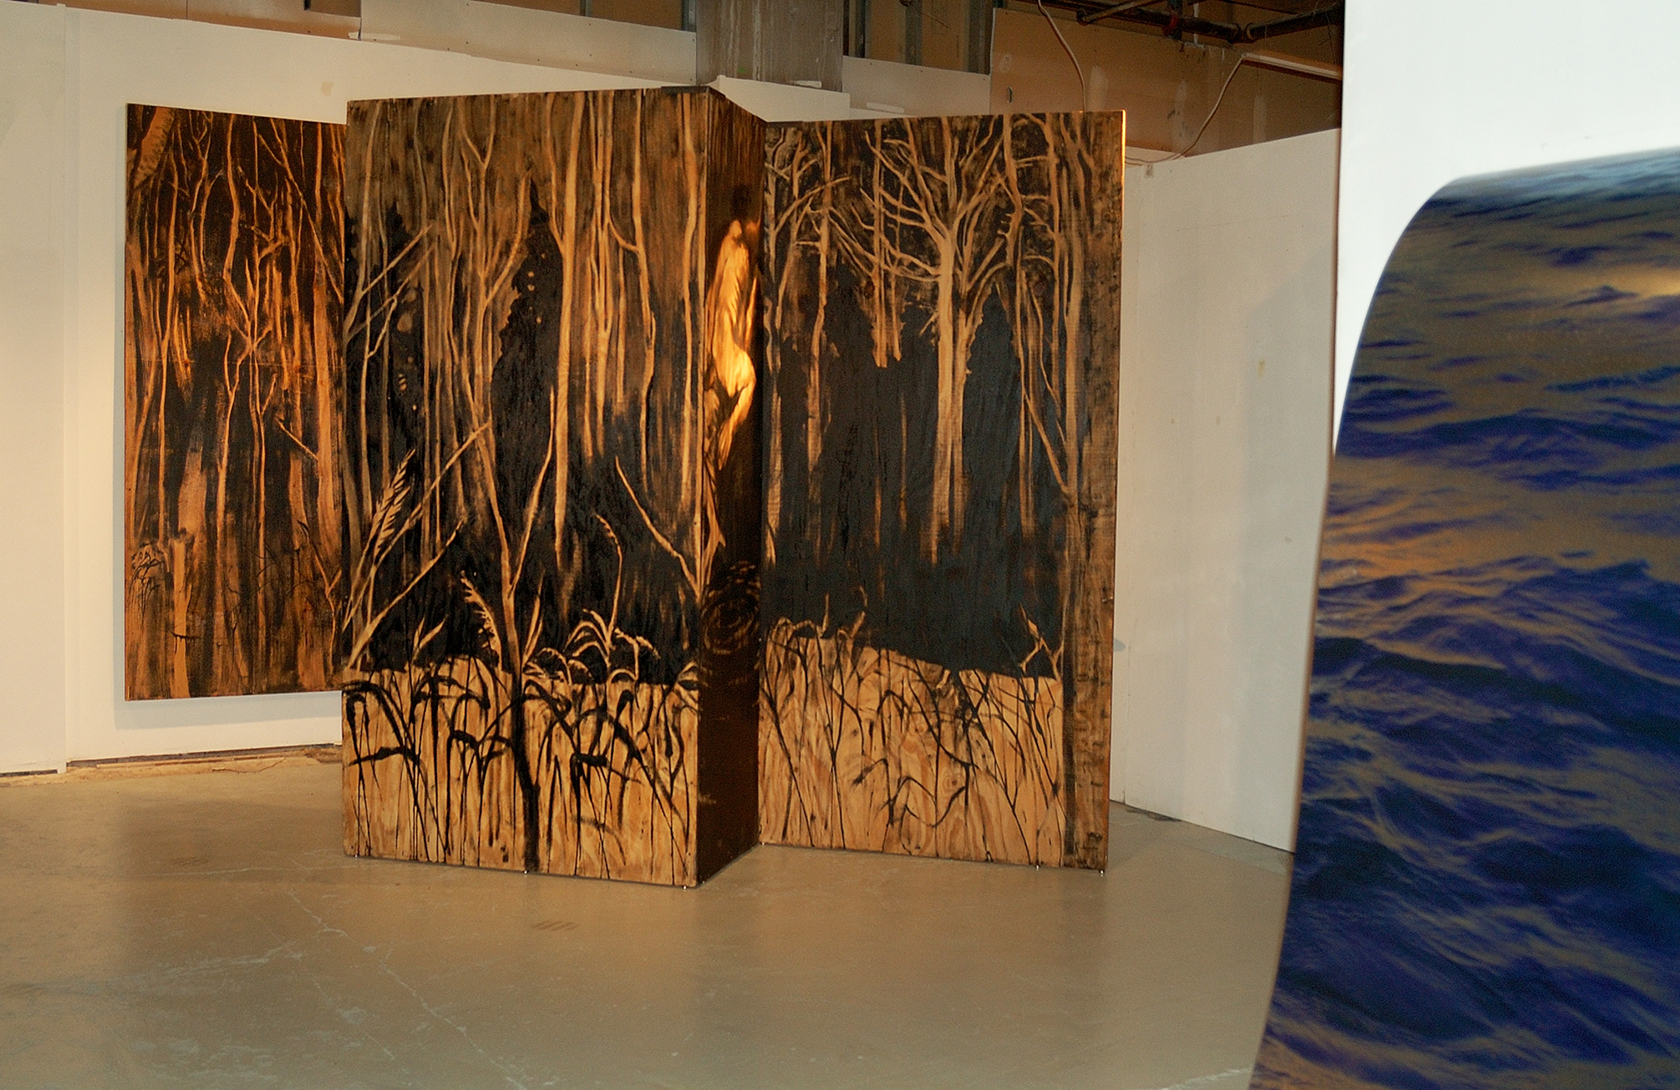  ​"Living Room" was a one-person show at Gallery 13, 811 LaSalle St., Minneapolis, MN. 
The animals are life-size, Corten steel, the panels, both freestanding 
and wall-hung, are each 4' x 8' plywood, painted in asphaltum. Another component of "Livin